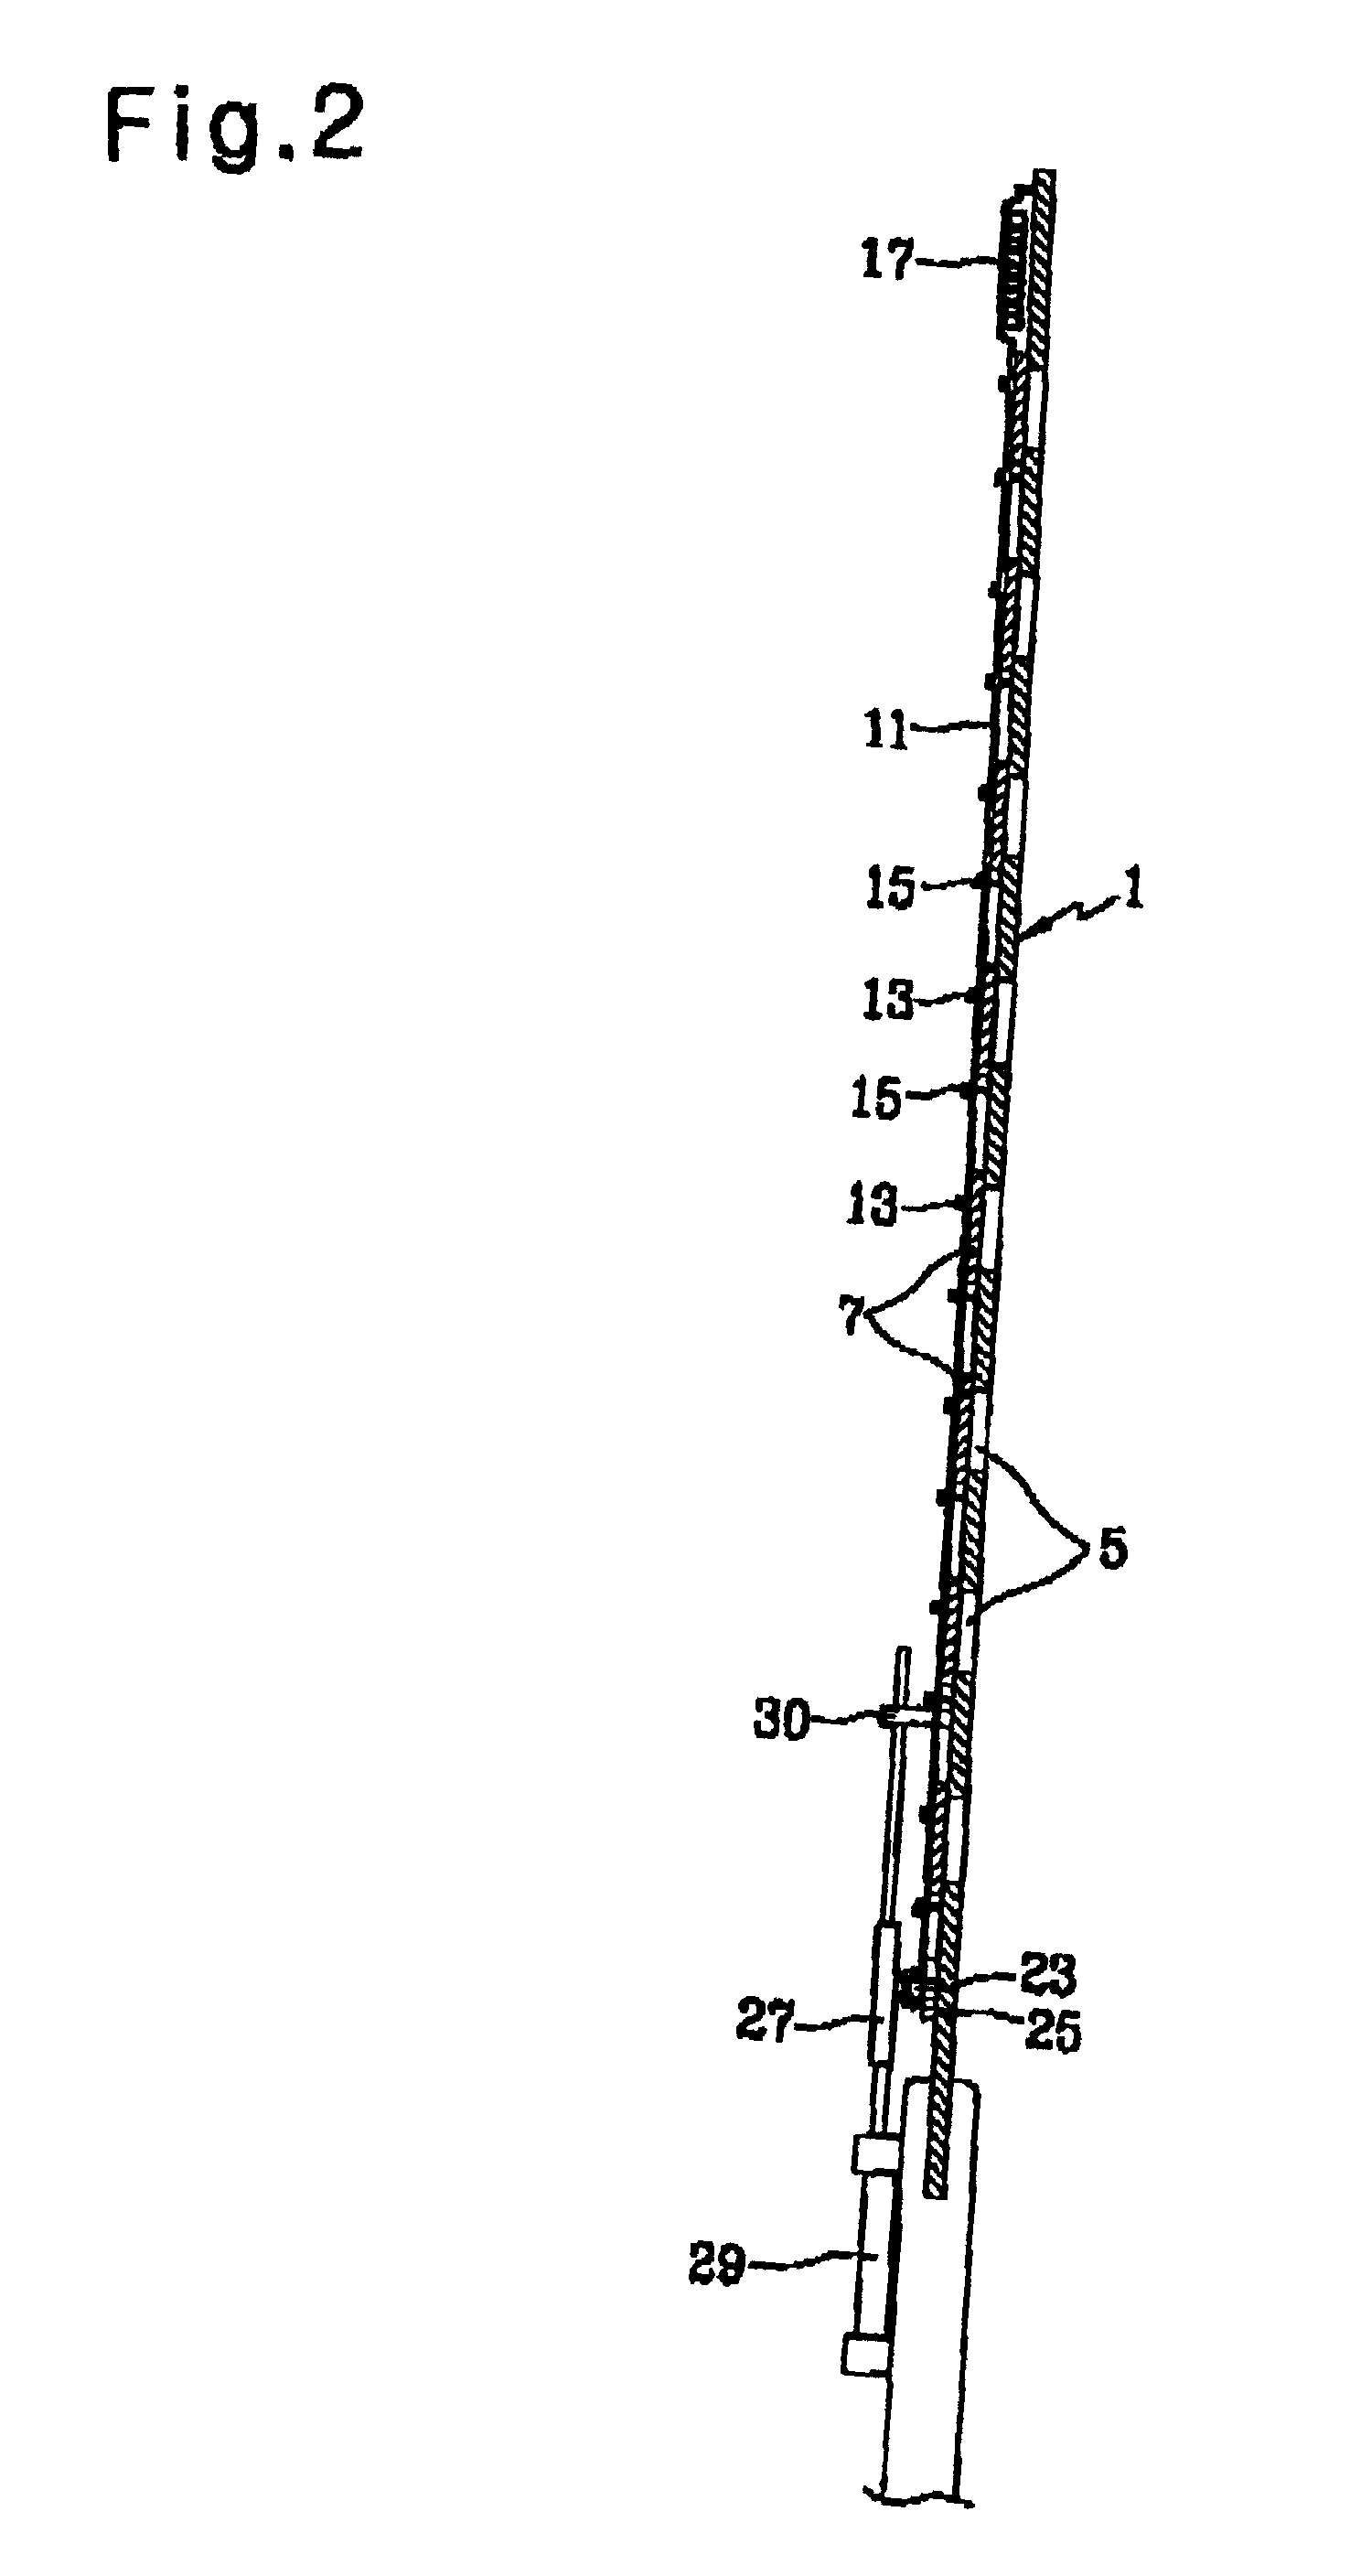 Windmill blade and apparatus for generating power using the blade